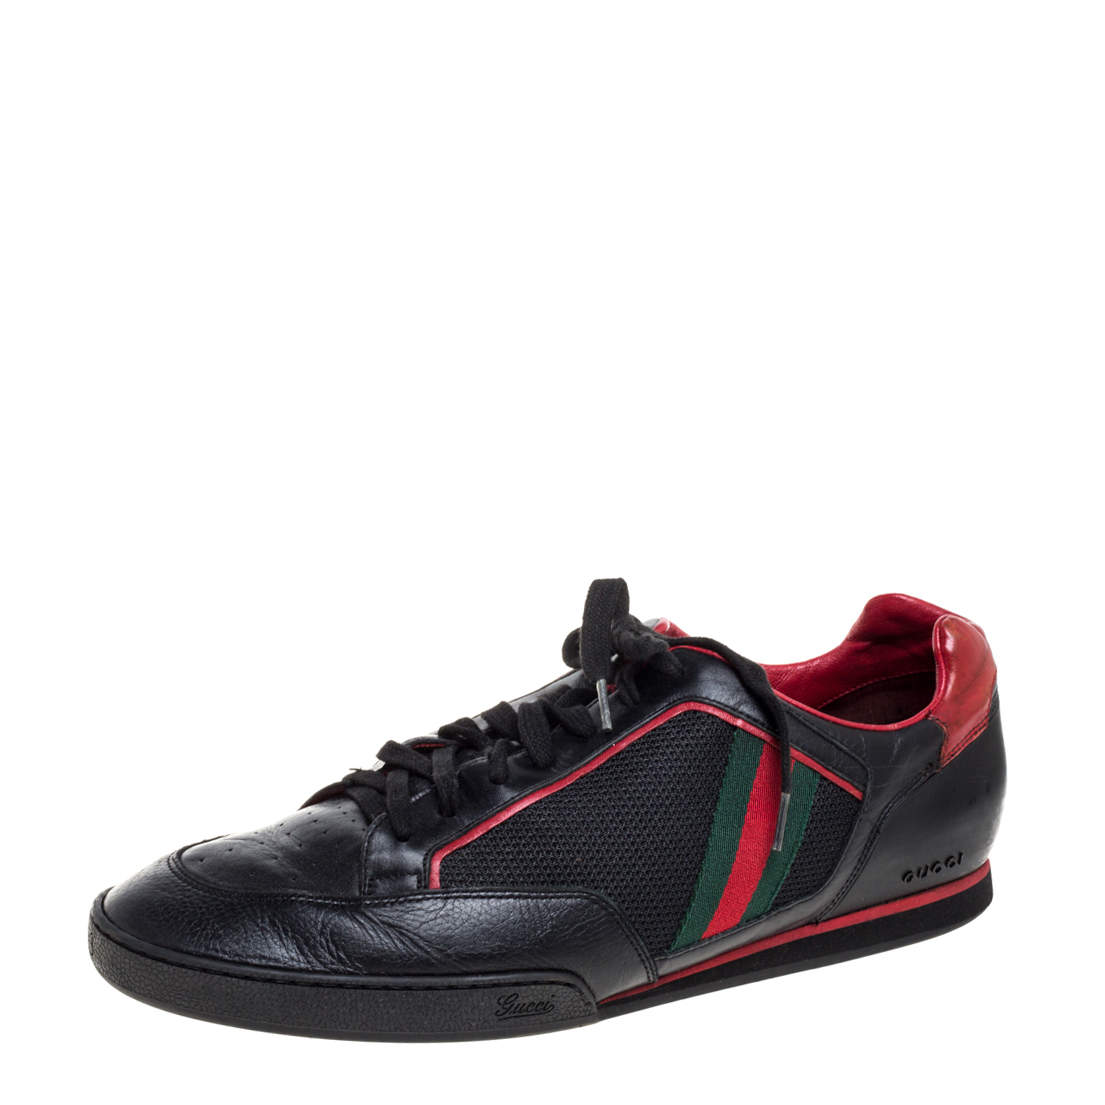 Gucci Black/Red Mesh Fabric and Leather Tennis Web Low Top Sneakers Size 45 Gucci | TLC